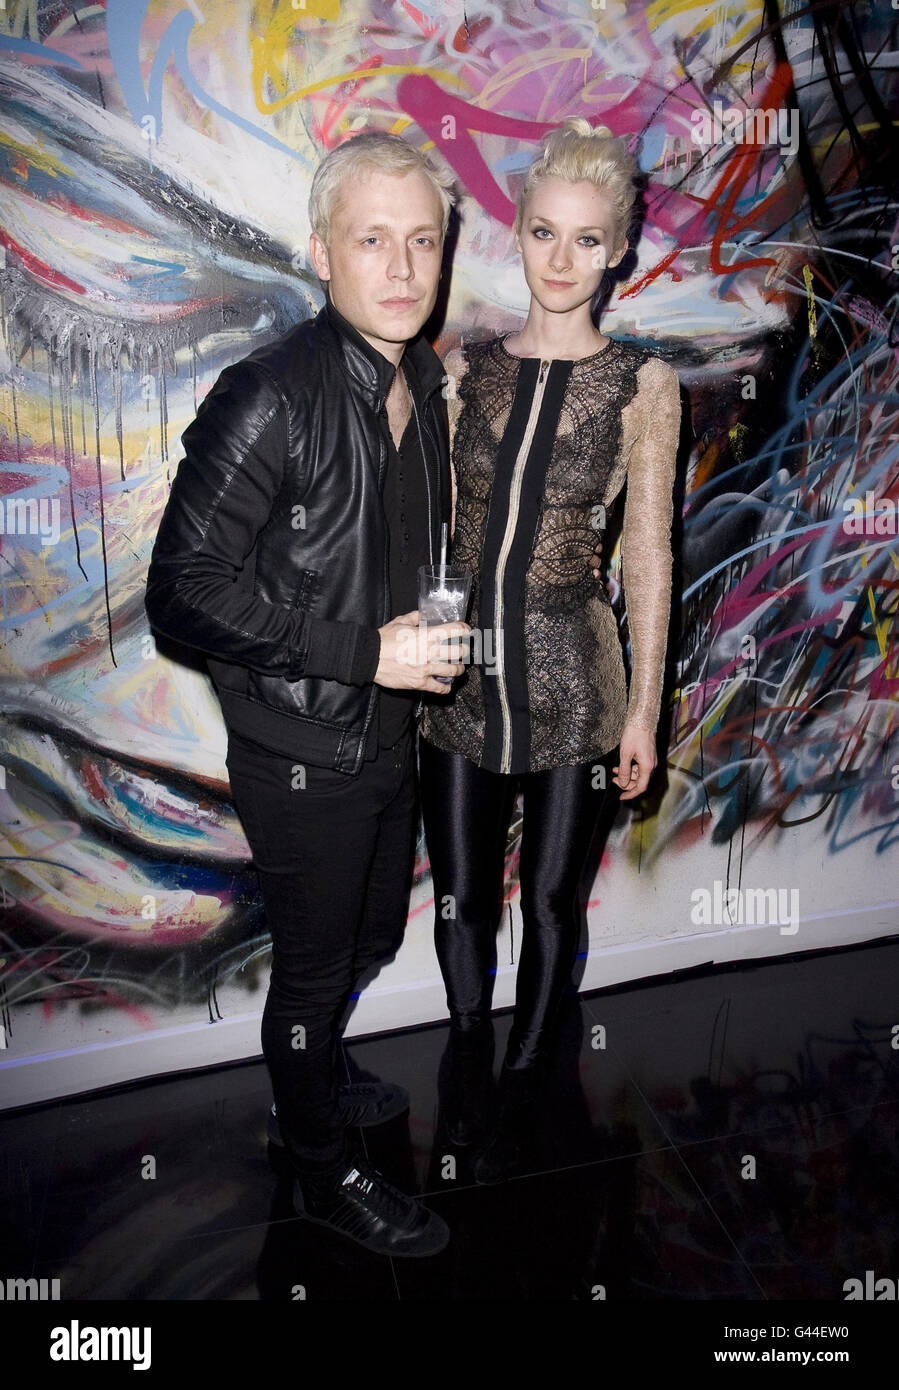 Hudson (a sinistra) e Portia Freeman frequentano il Sony Music & Next Model Management London Fashion Week Closing Party, Exile, Millbank Tower, Millbank London. Foto Stock